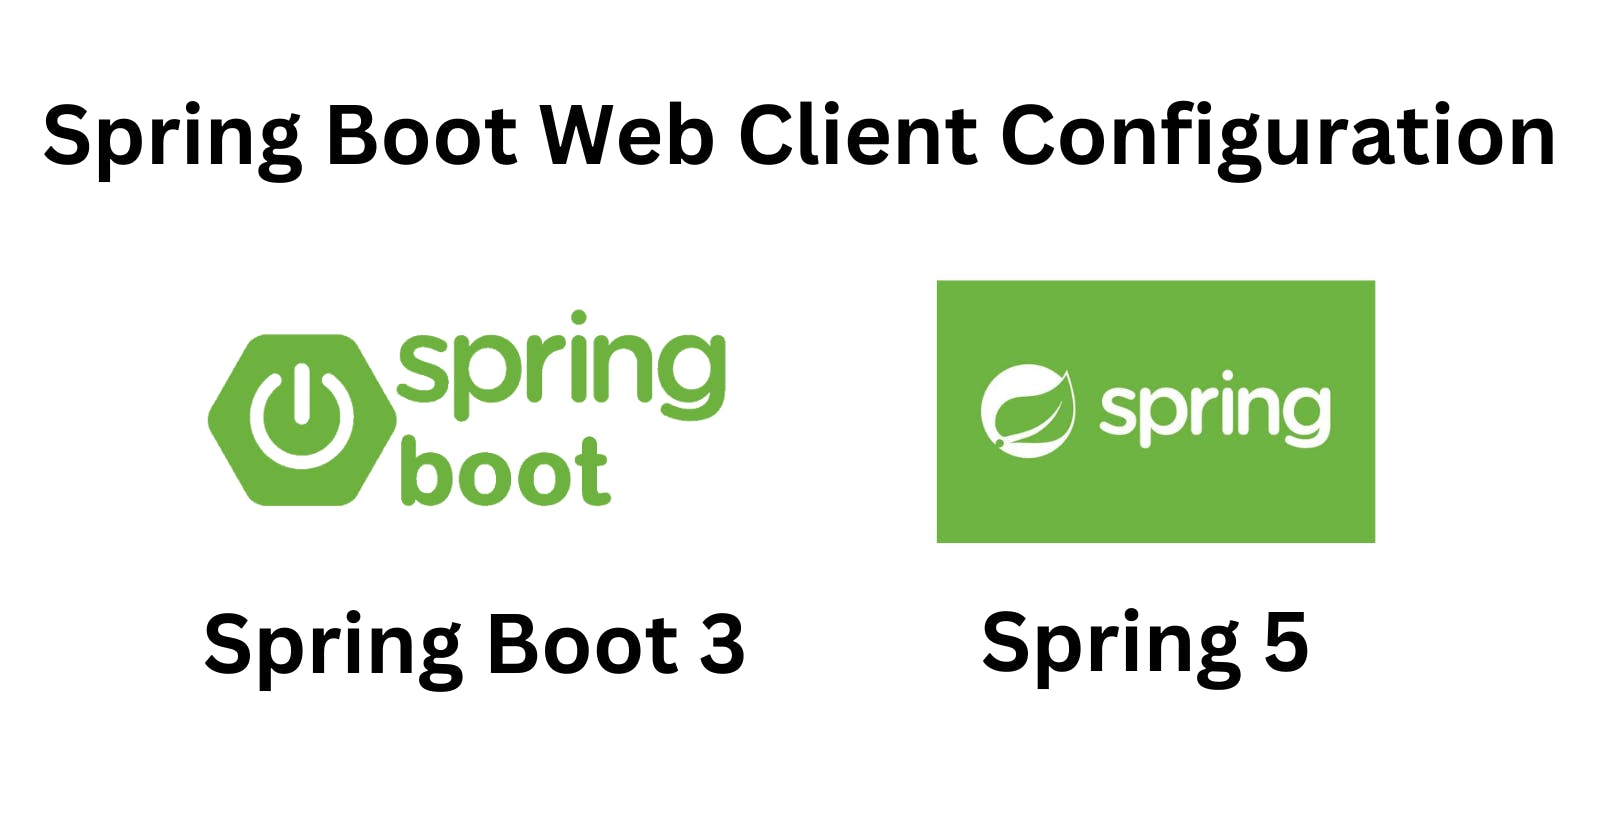 (2024) Configure Spring Web Client with Spring boot 3 & Spring 5.